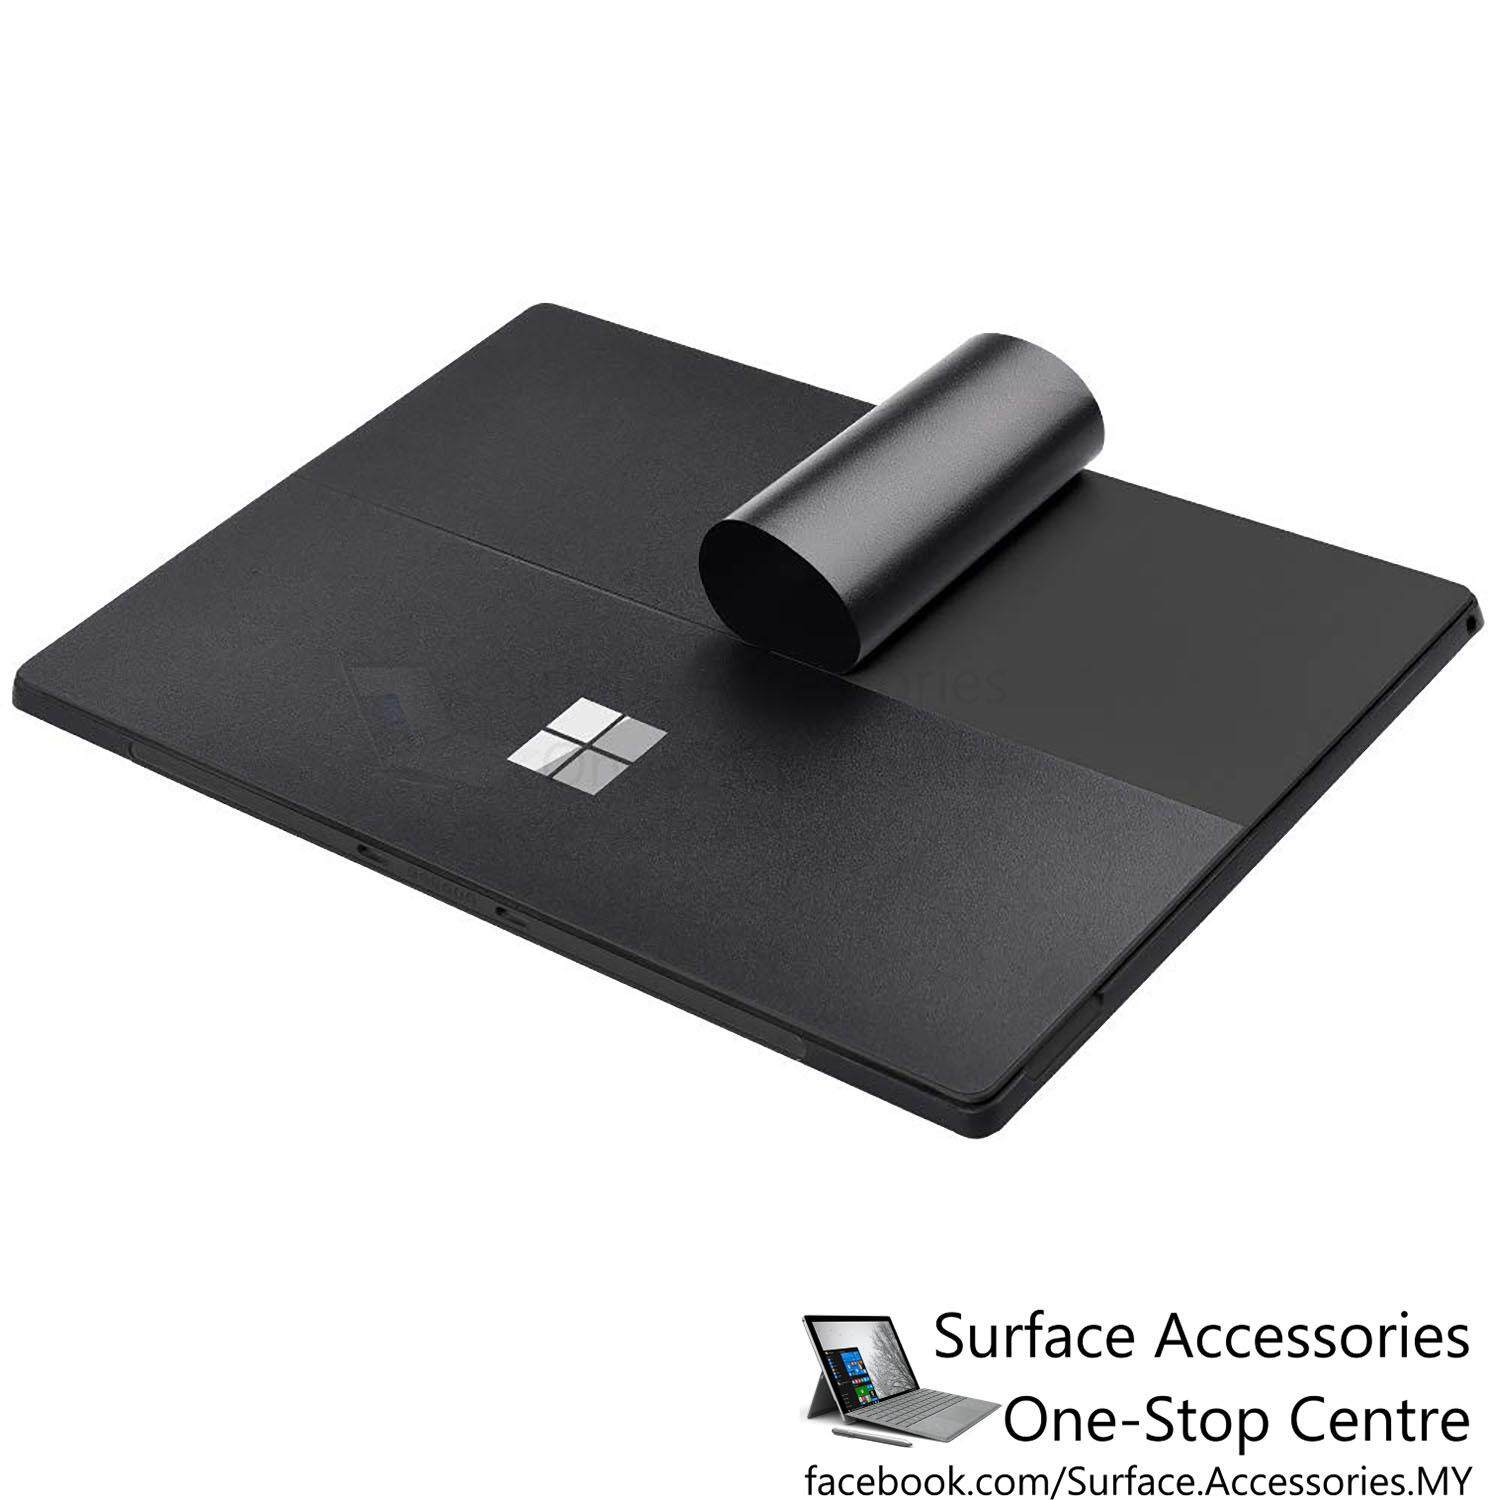 [MALAYSIA]Microsoft Surface Pro 3 Case Skin Case Cover Stand Protection Surface Pro 3 Wrap Surface Pro 3 Skin Surface Pro 3 Vinyl Wrap Surface Pro 3 Decal